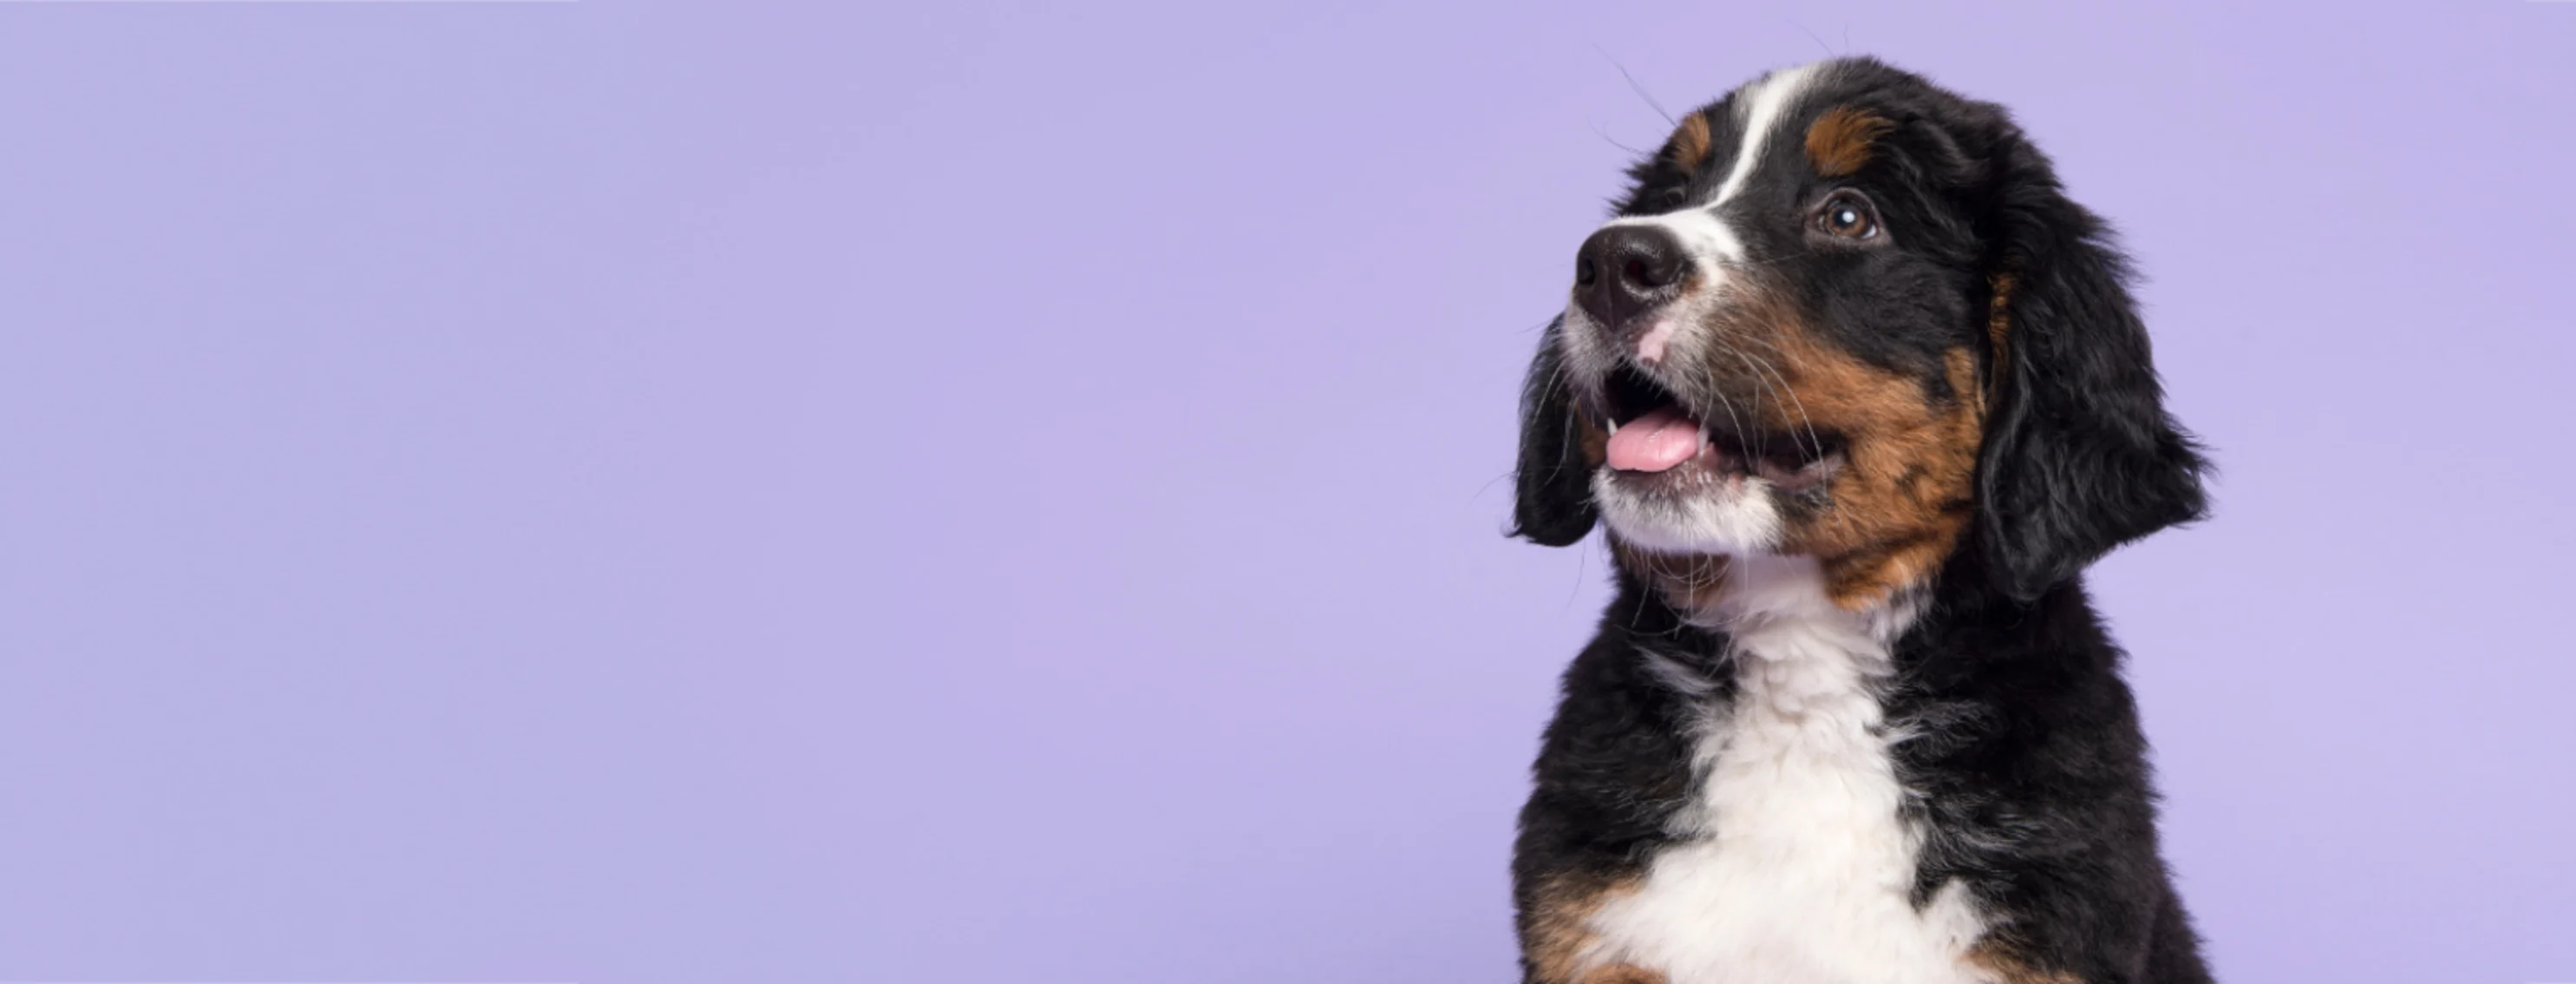 Dog Looking Left with Tongue Out in Front of a Lavender Studio Background